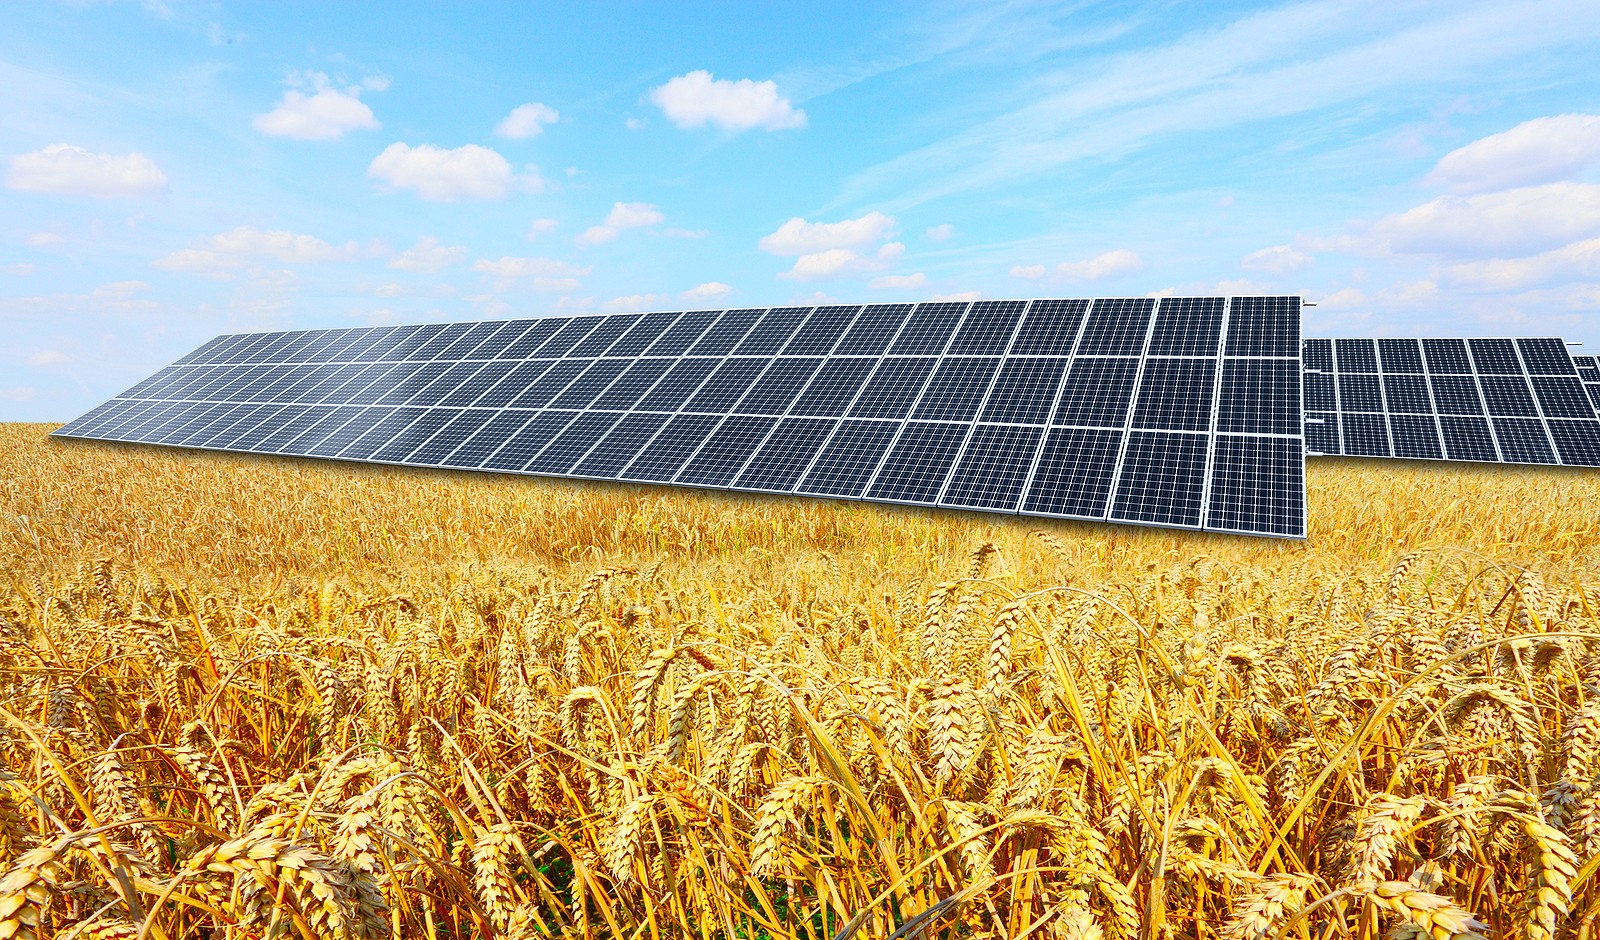 Several rows of solar panels set among a wheat field with blue skies in the background.